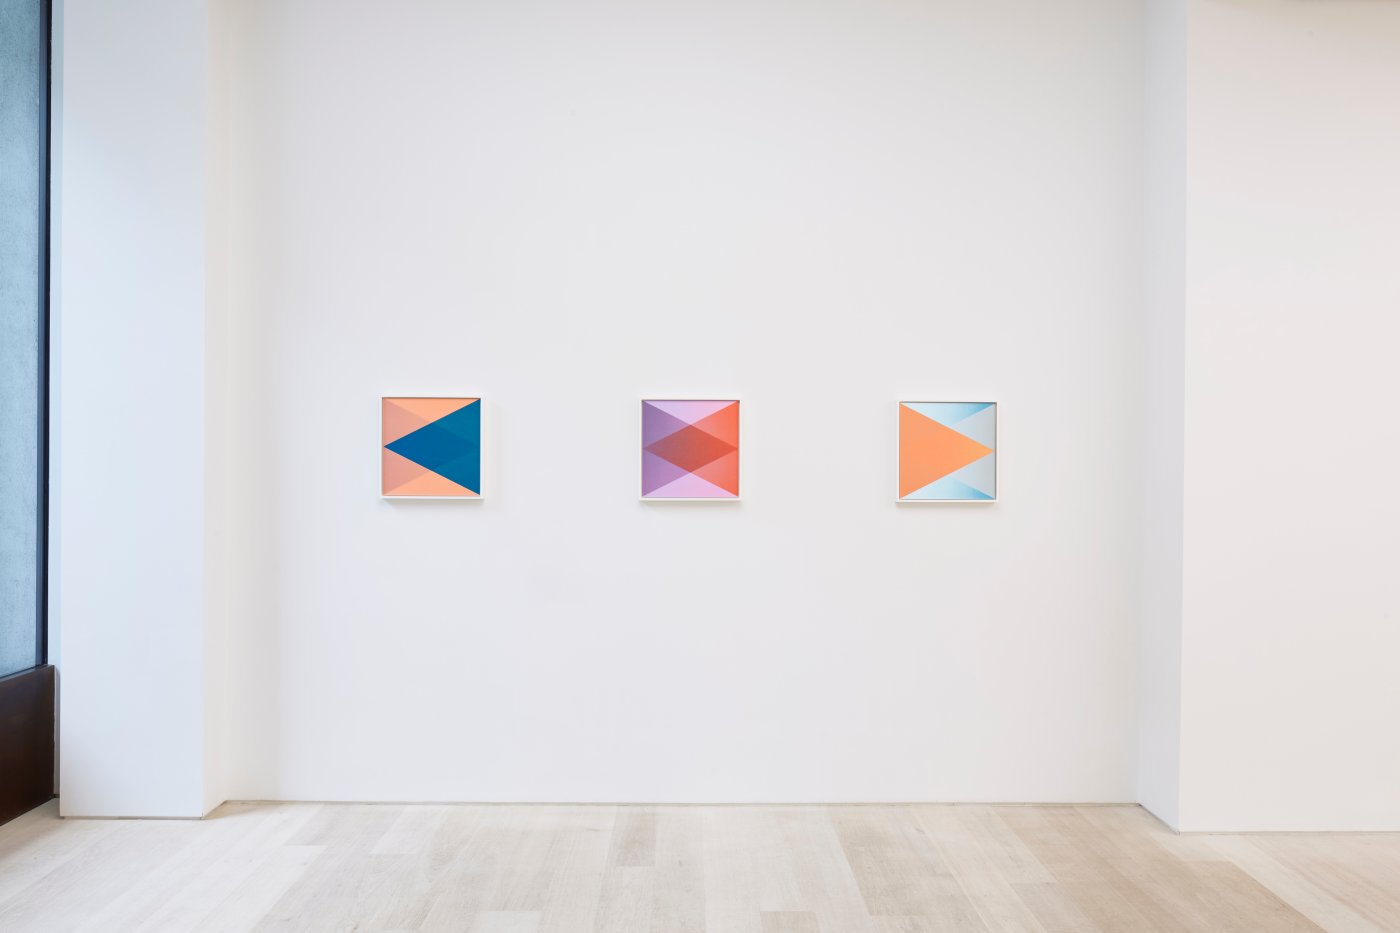 Installation image for Rana Begum: Reflection on Colour and Form, at Cristea Roberts Gallery